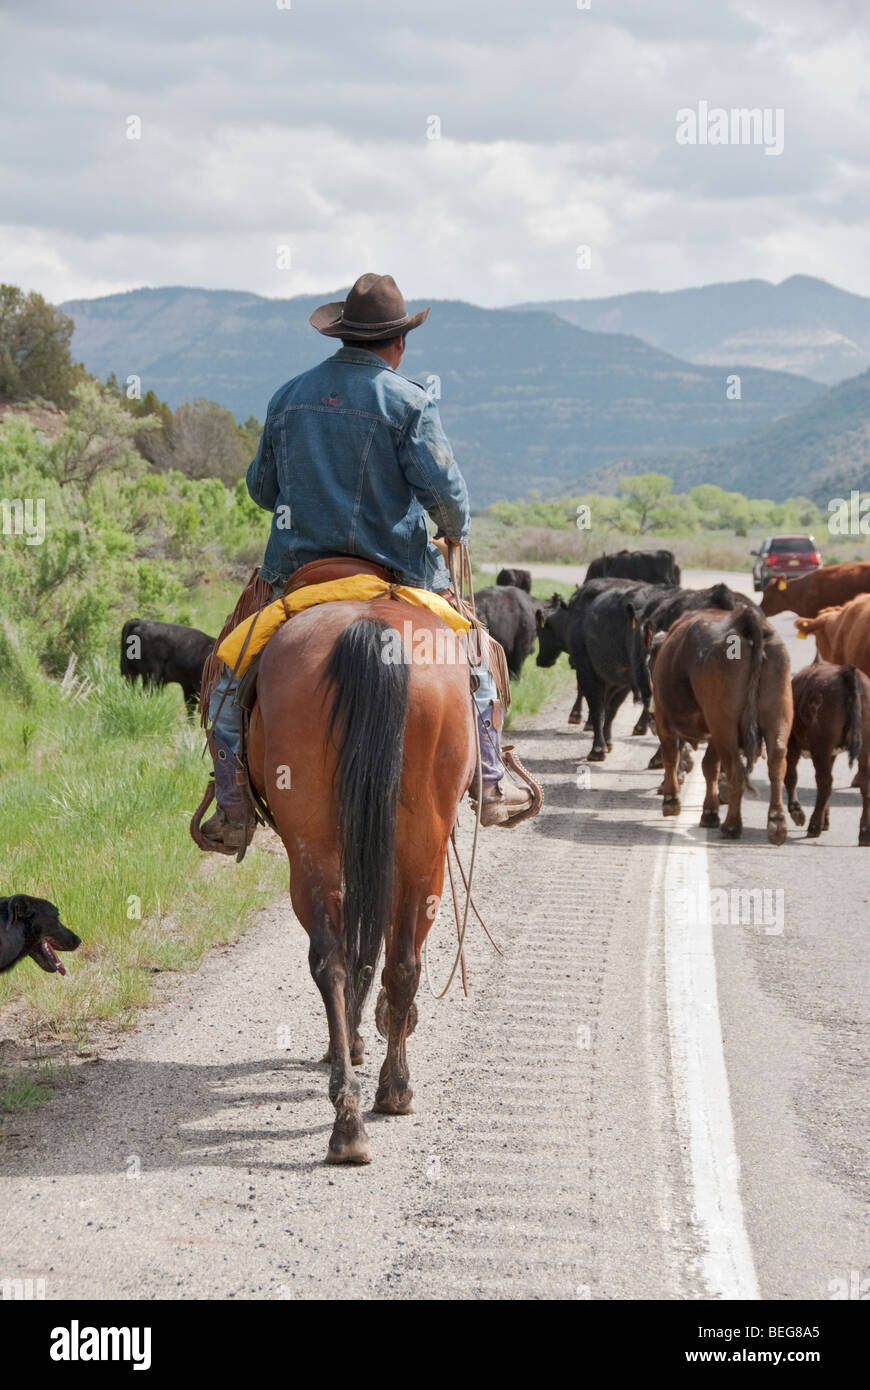 cowboy on horseback using rope to drive cattle along a public highway in western Colorado cattle dog assisting Stock Photo